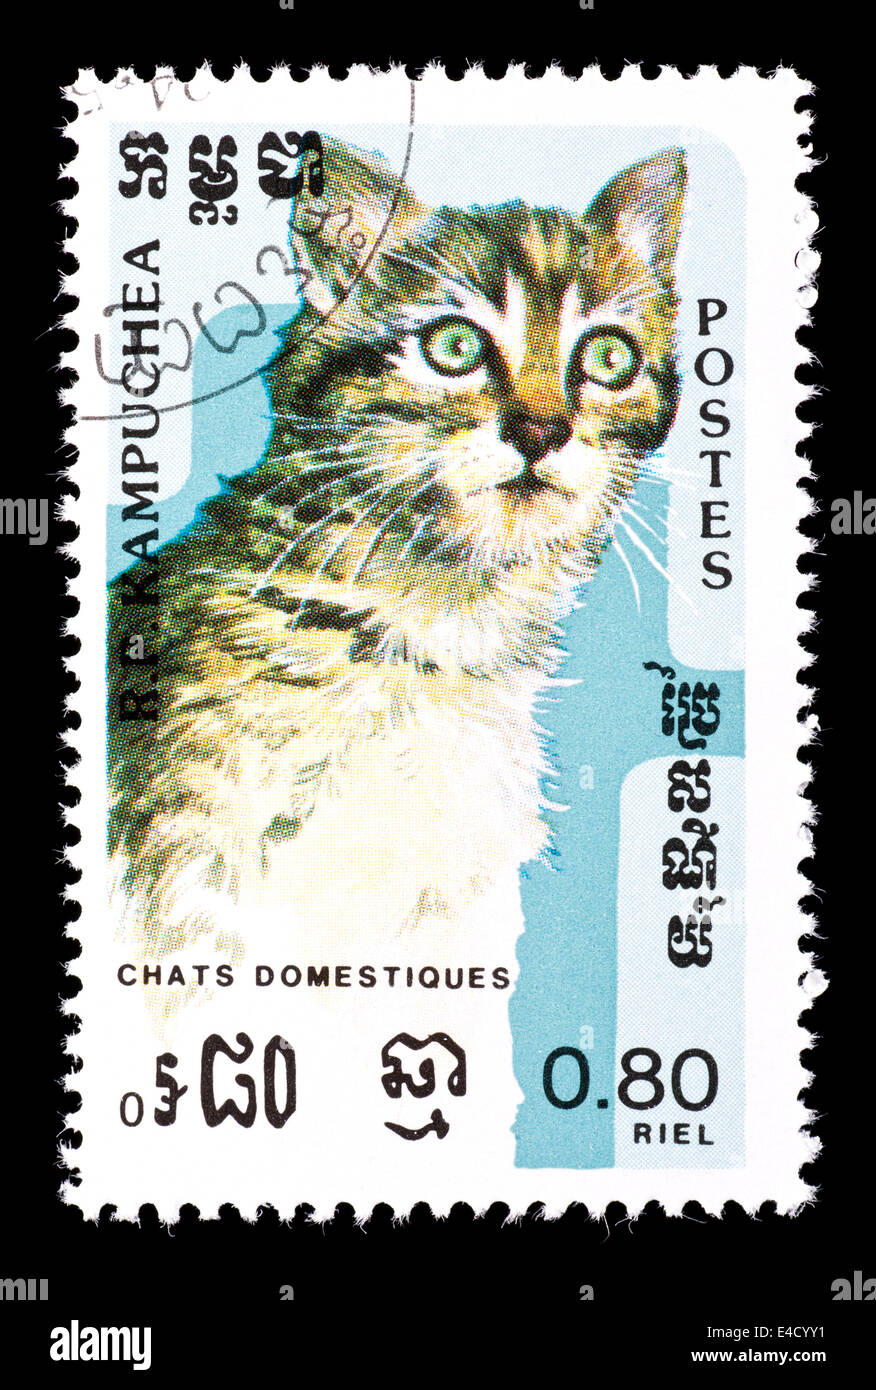 POstage stamp from Cambodia (Kampuchea) depicting a domestic cat. Stock Photo